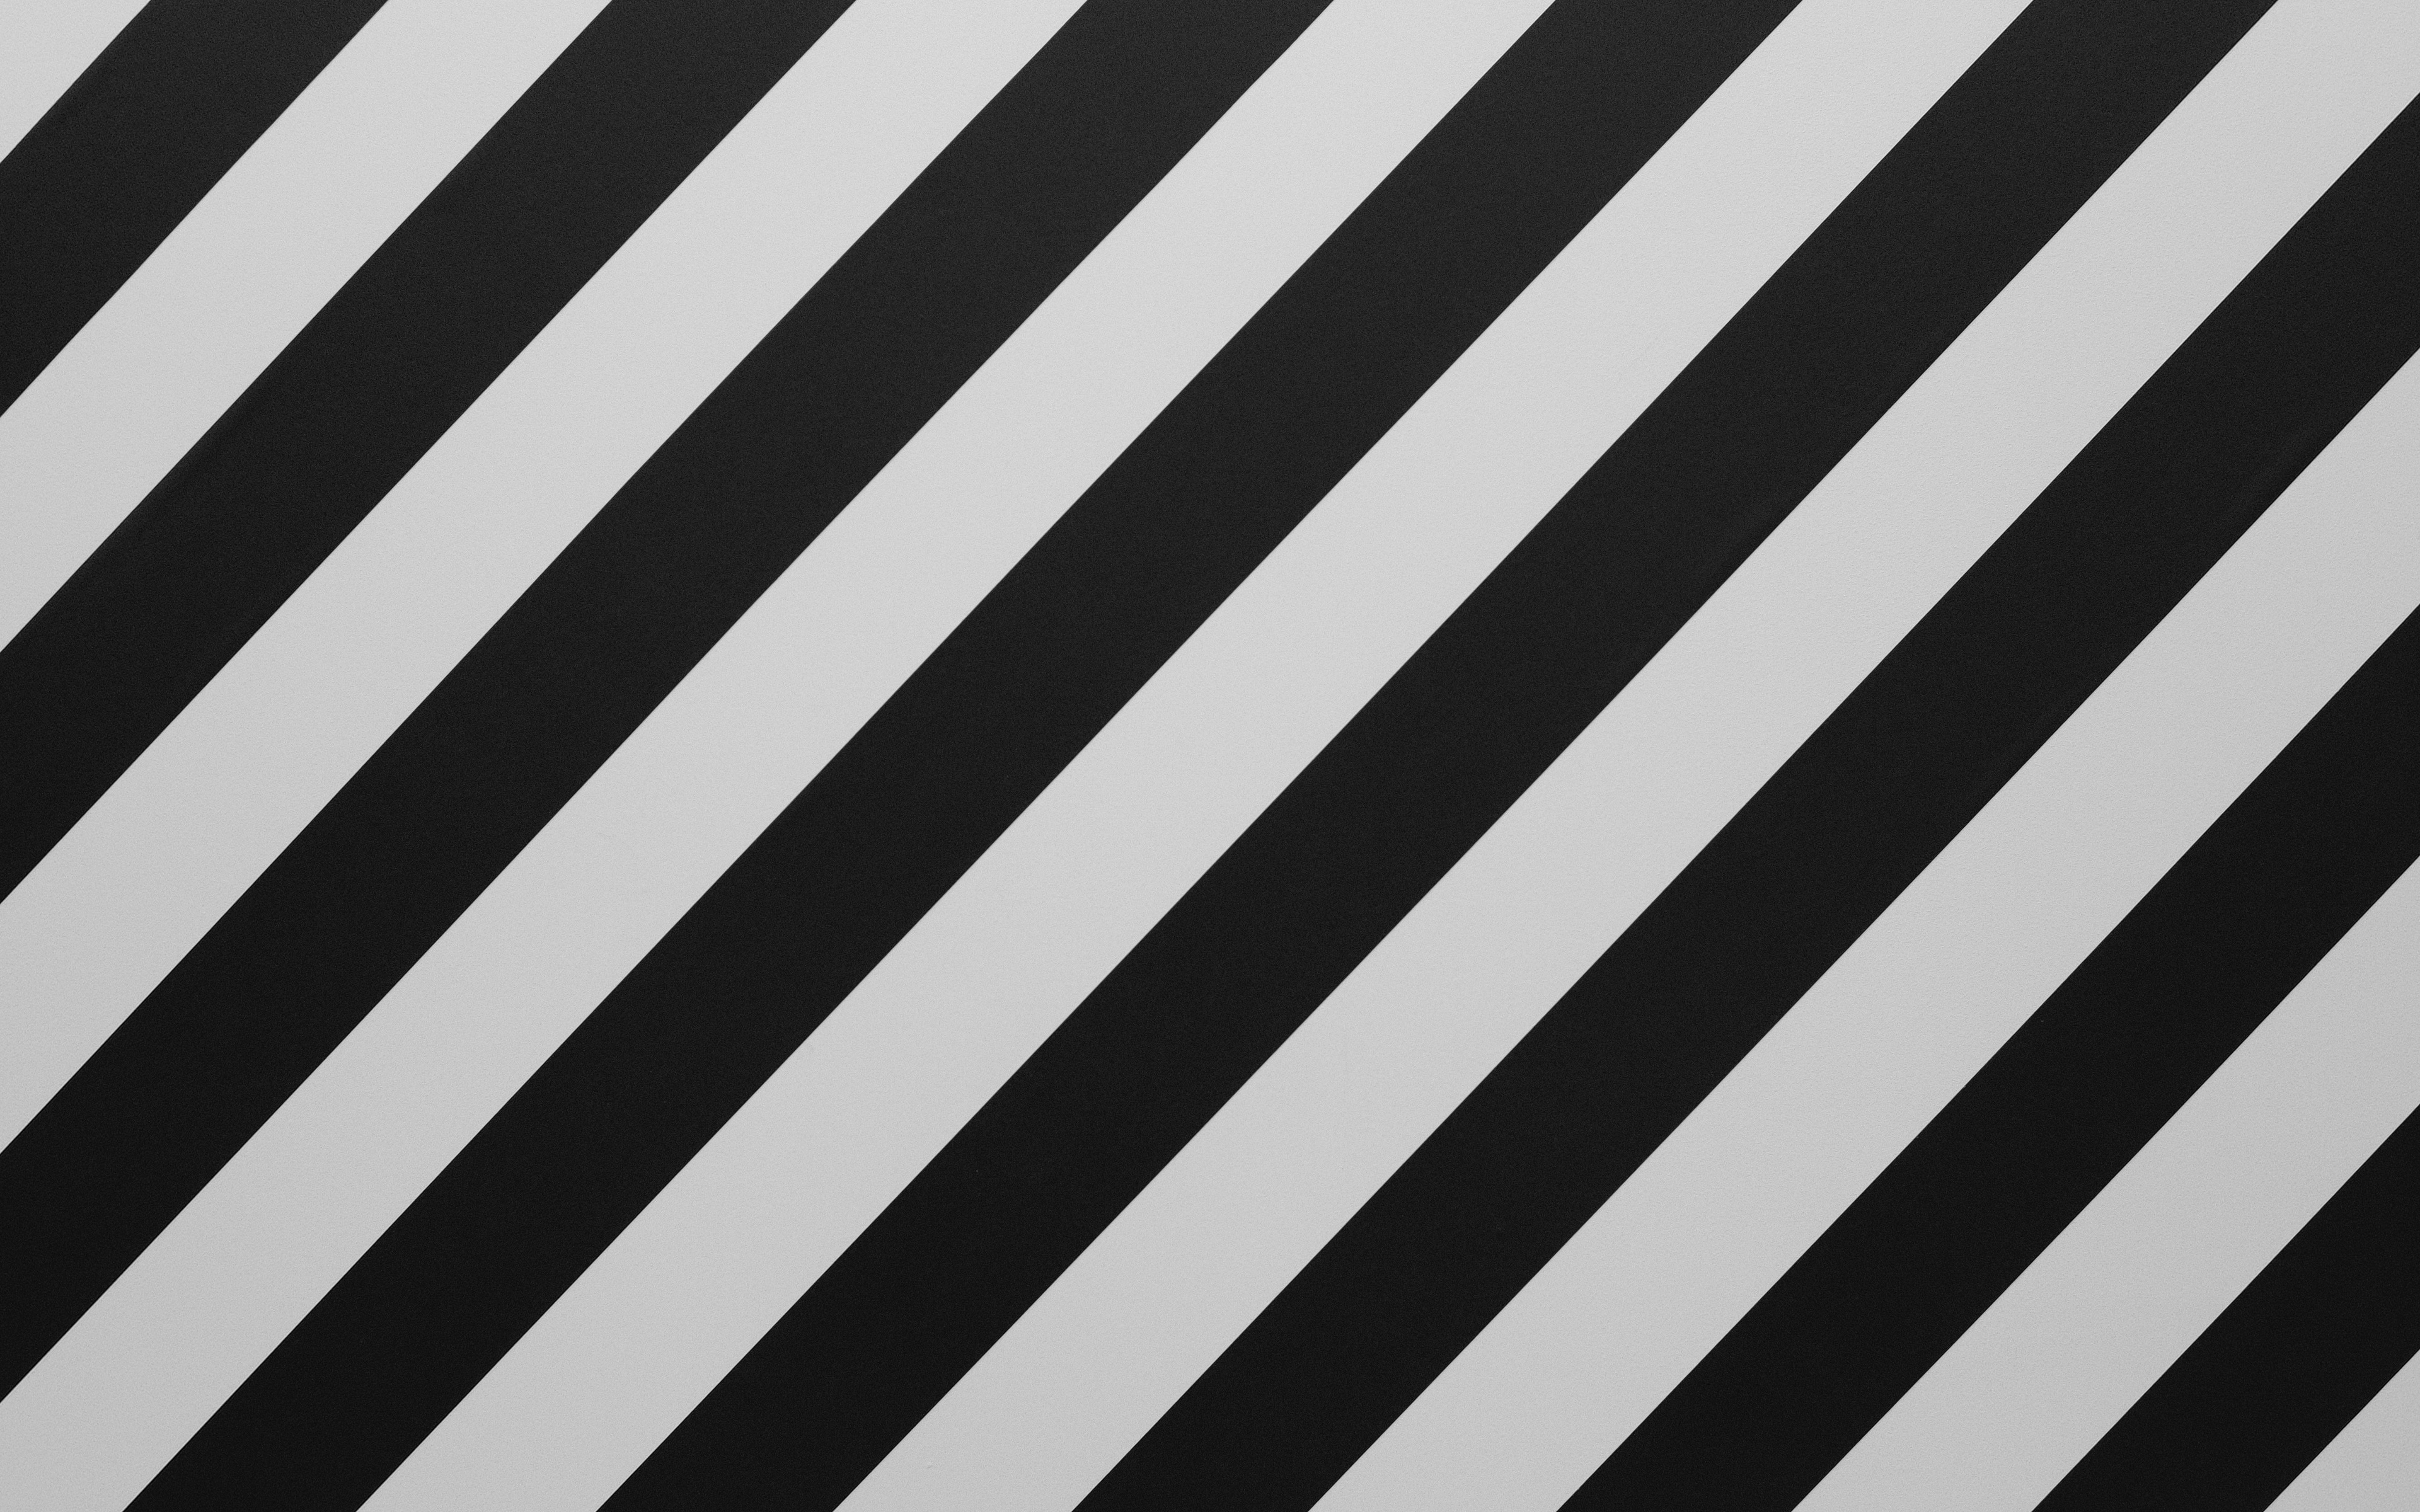 Download wallpaper black white stripes background, grunge black white background, stone texture, zebra texture, lines texture for desktop with resolution 3840x2400. High Quality HD picture wallpaper